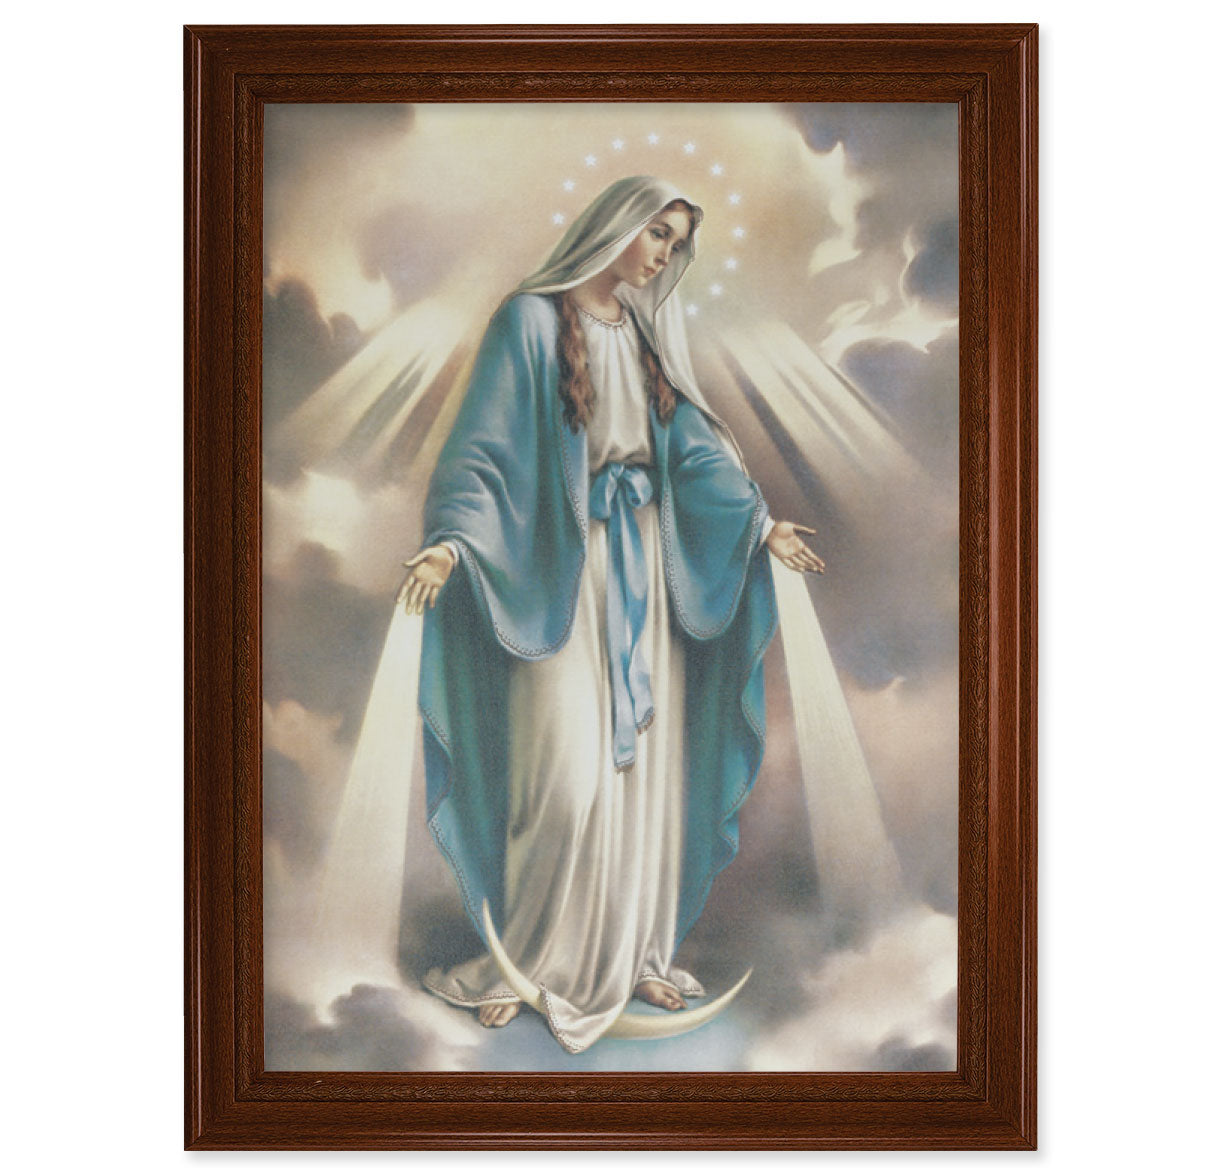 Our Lady of Grace Walnut Finish Framed Canvas Art